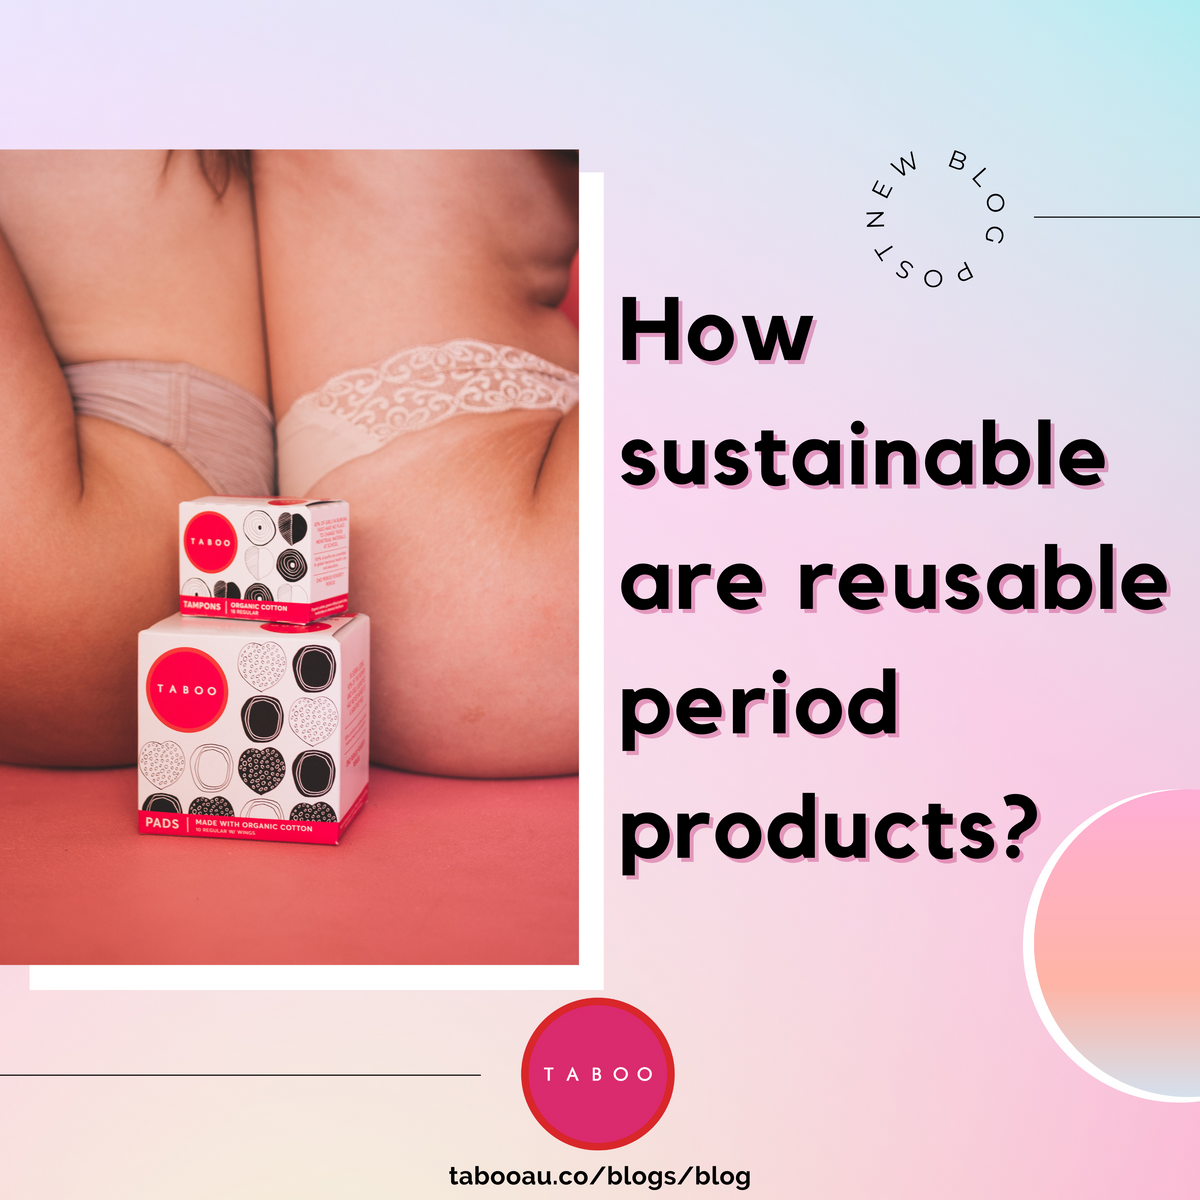 How Sustainable are Reusable Period Products? – TABOO Period Products